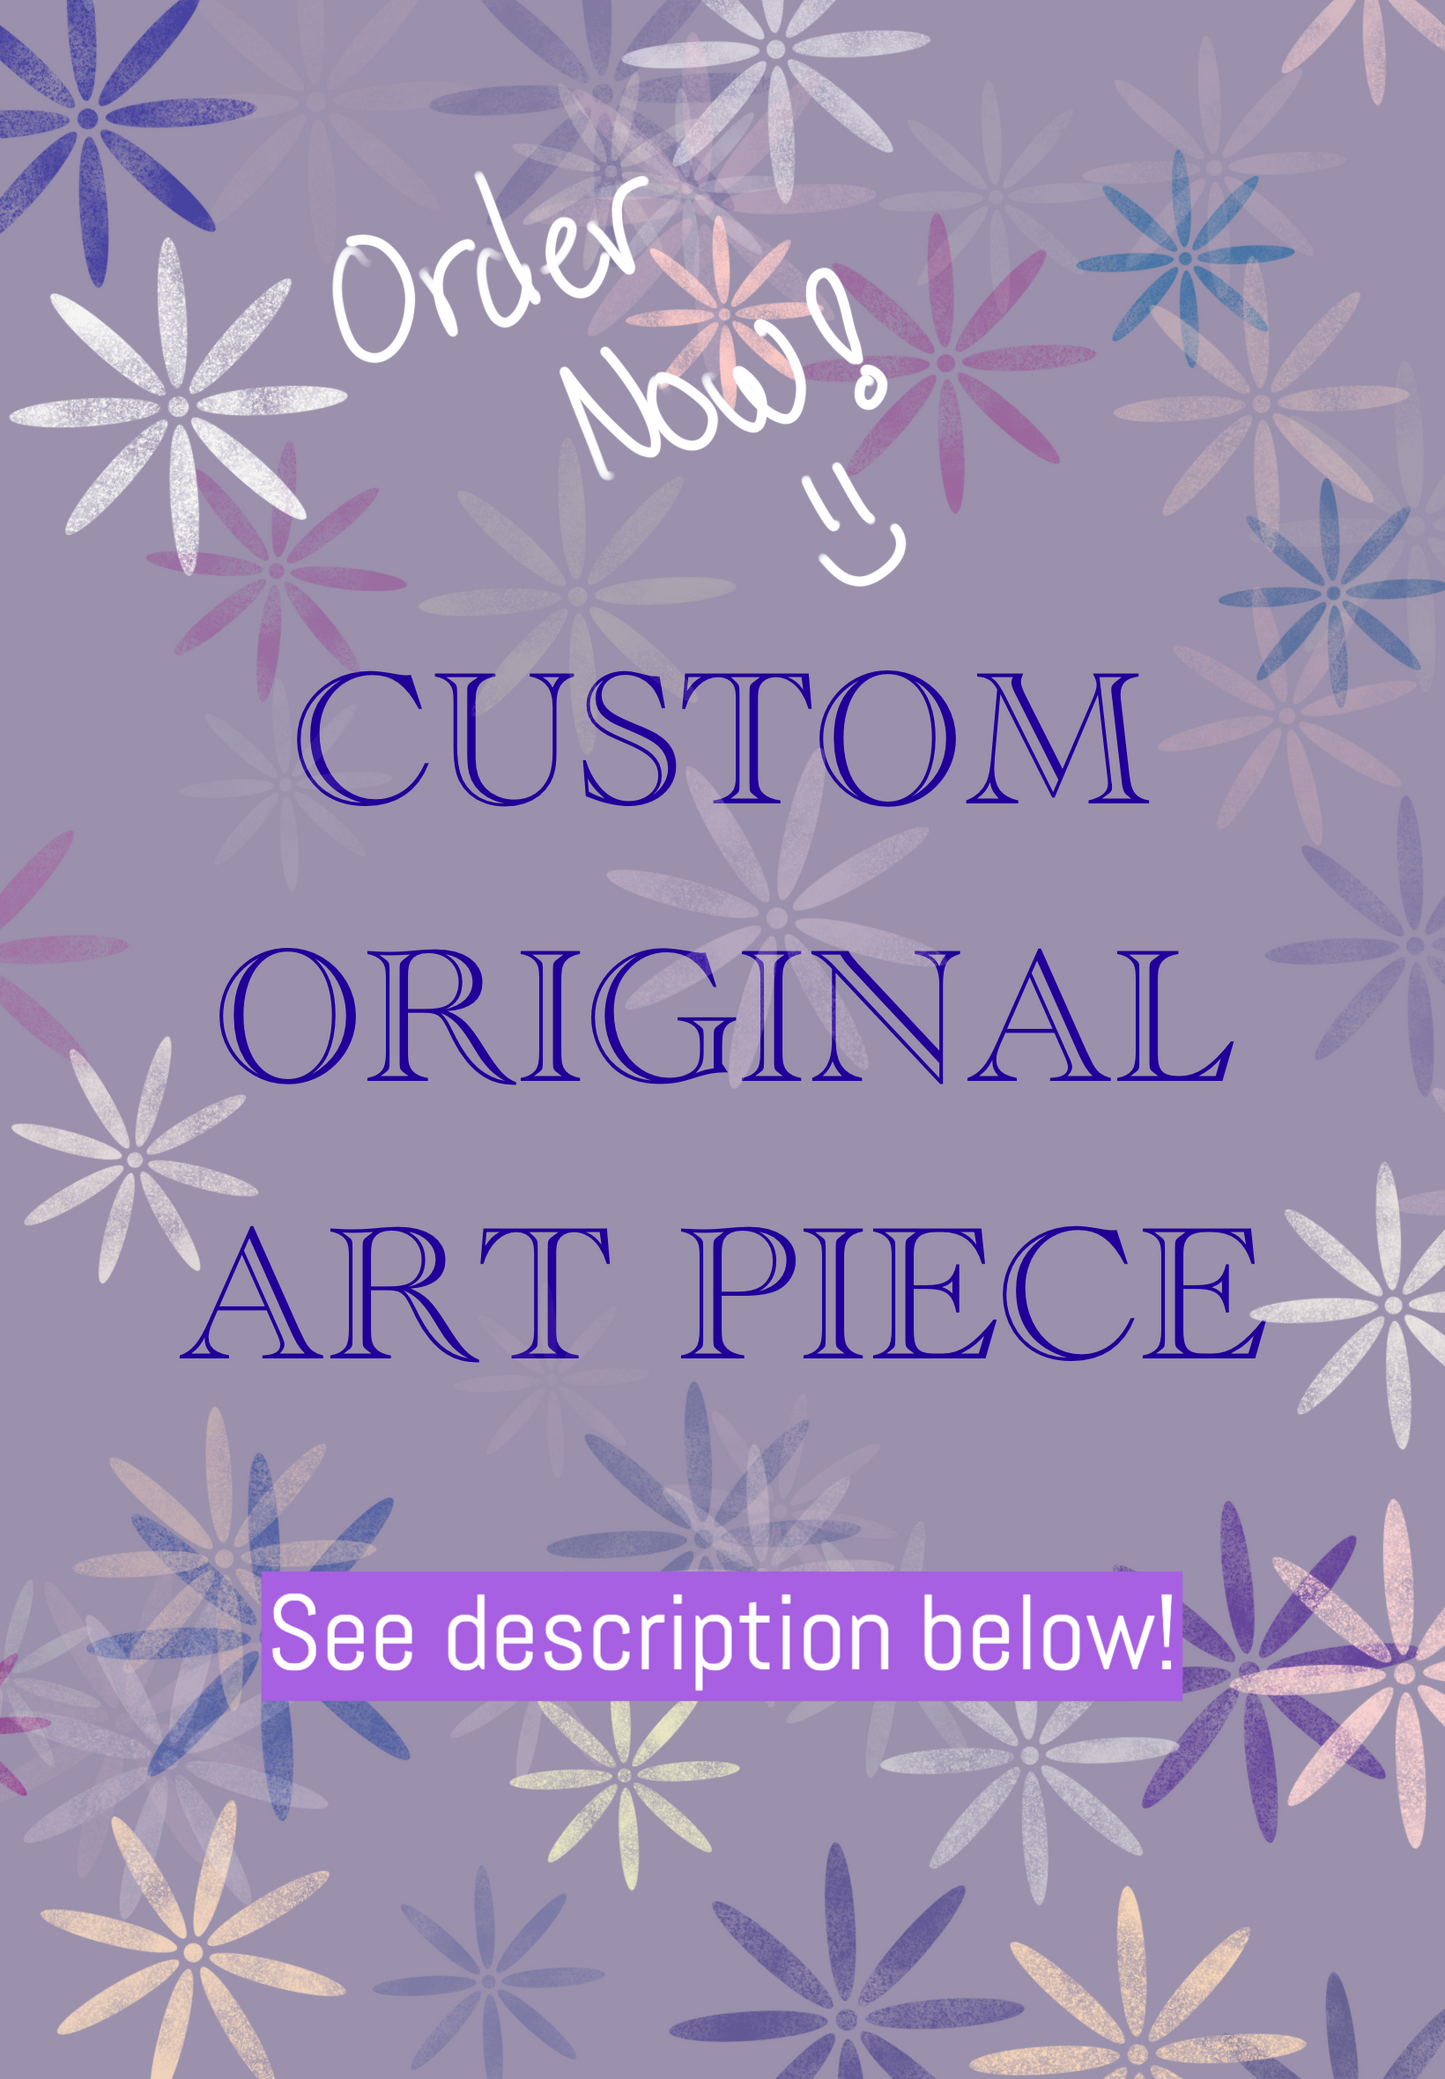 Commission a custom print or original art piece from me!